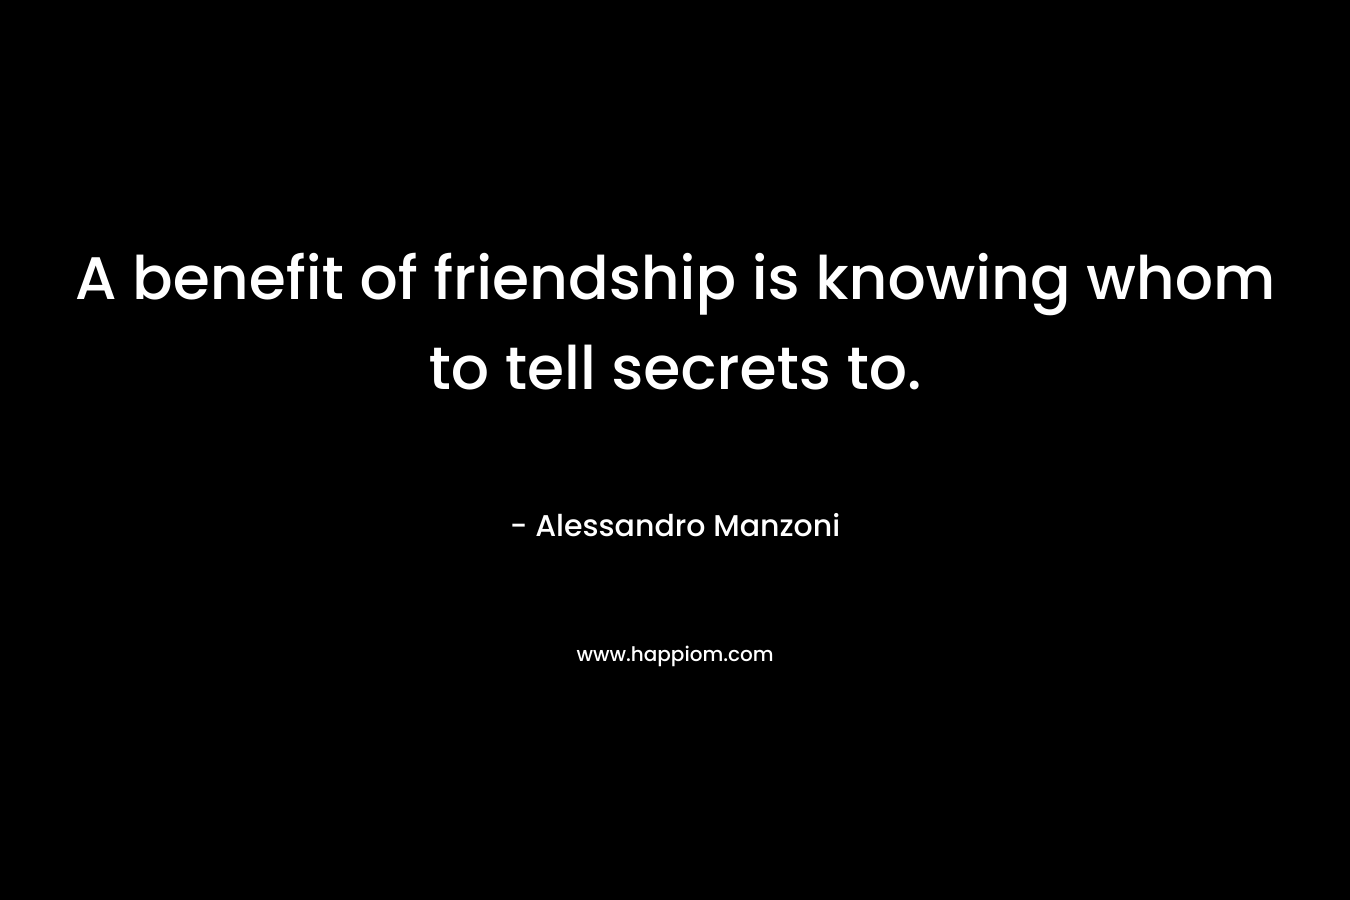 A benefit of friendship is knowing whom to tell secrets to.